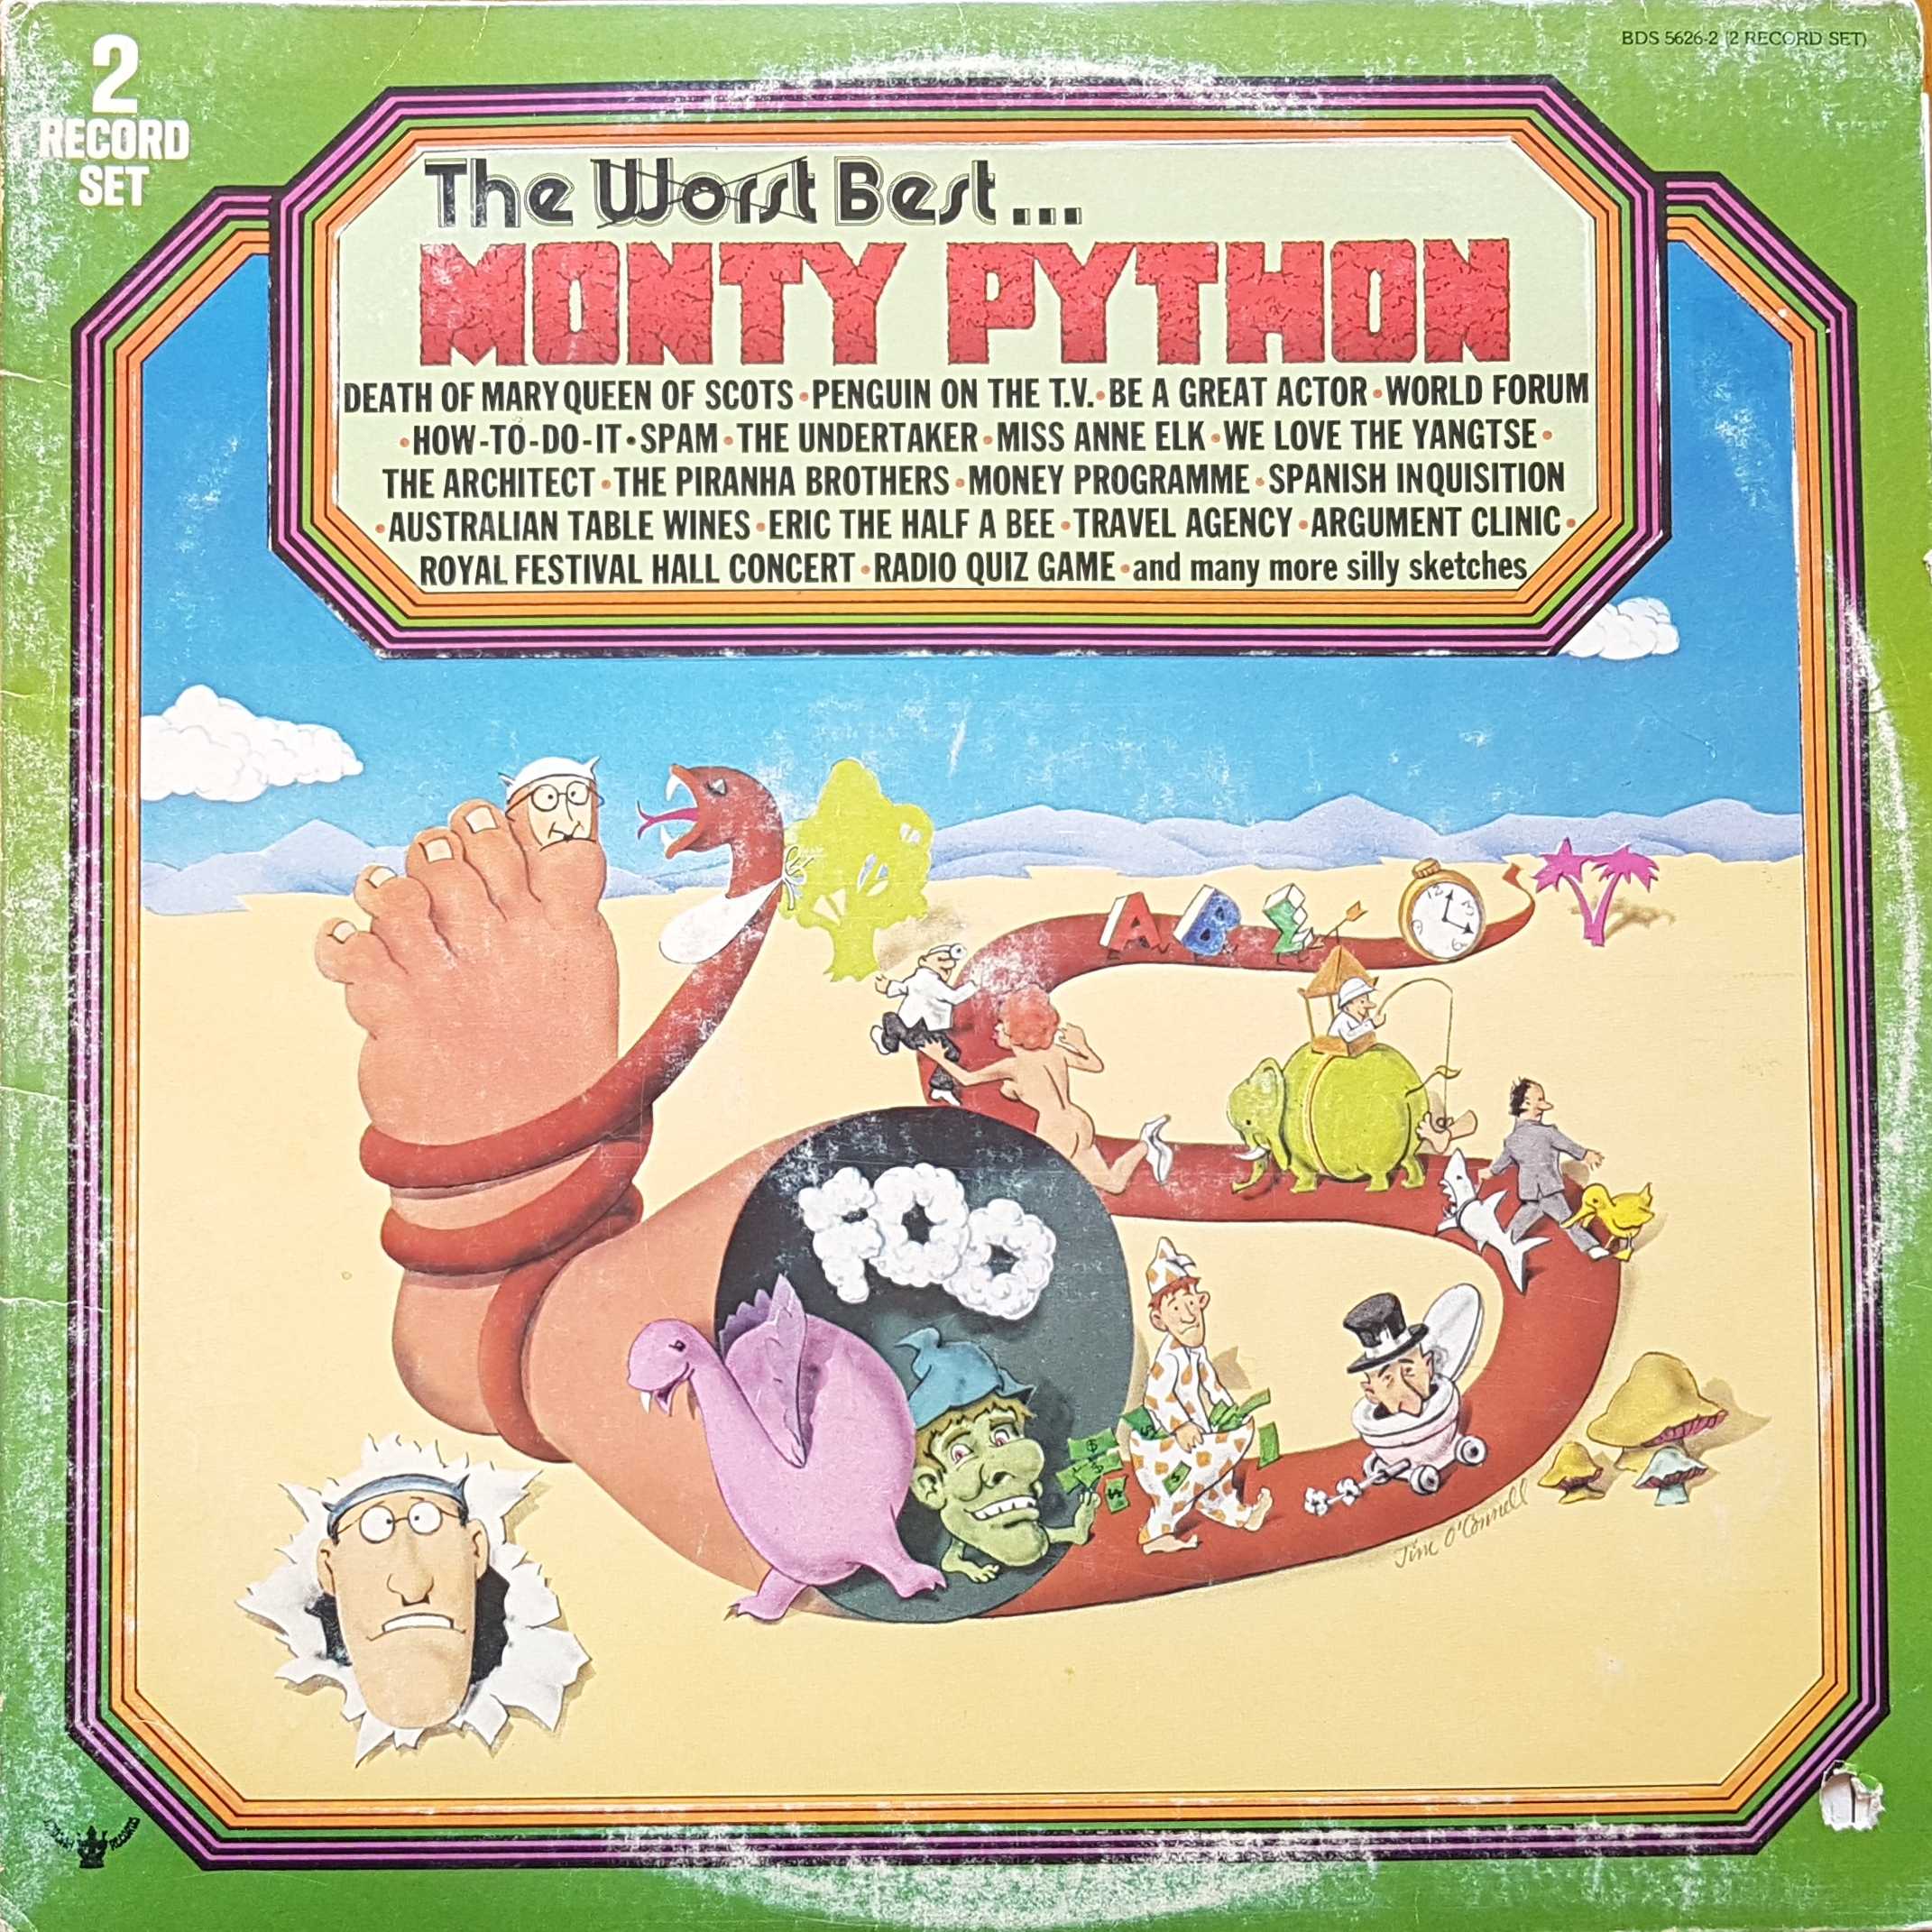 Picture of BDS 5656-2 The (worst) best of Monty Python - US DJ import by artist Monty Python from the BBC albums - Records and Tapes library